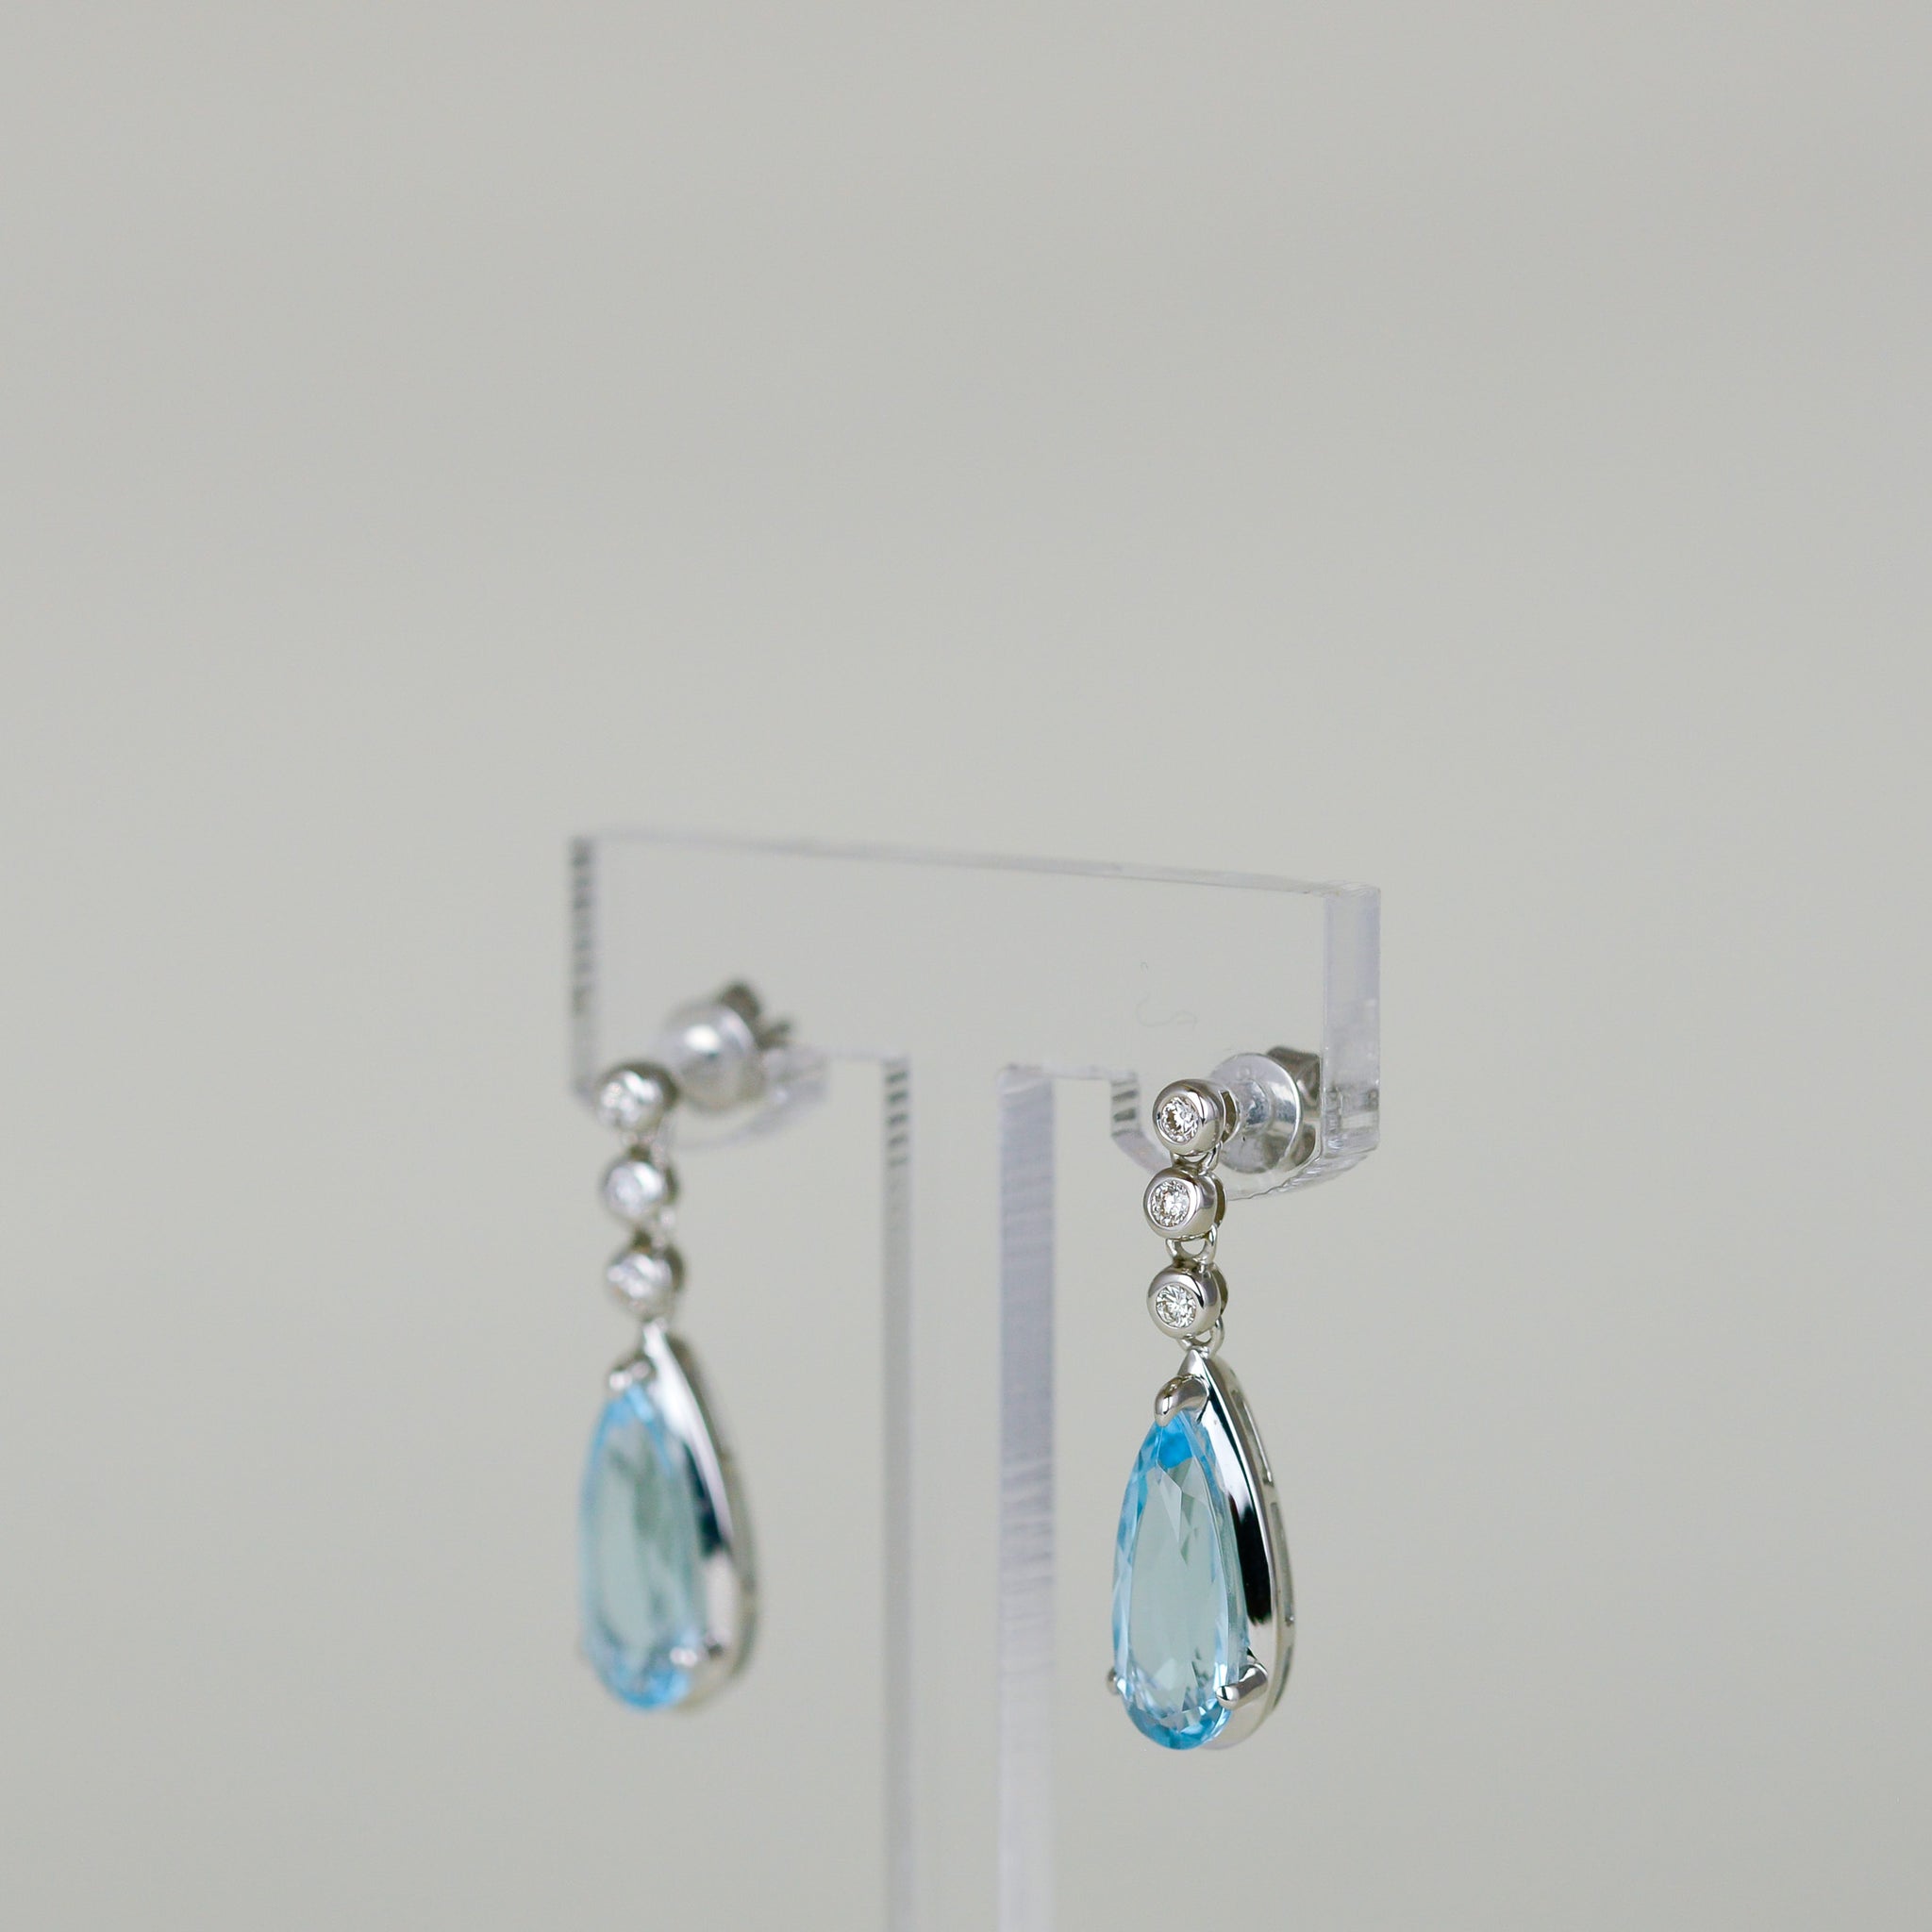 9ct White Gold 4.00ct Oval Blue Topaz and Diamond Drop Earrings